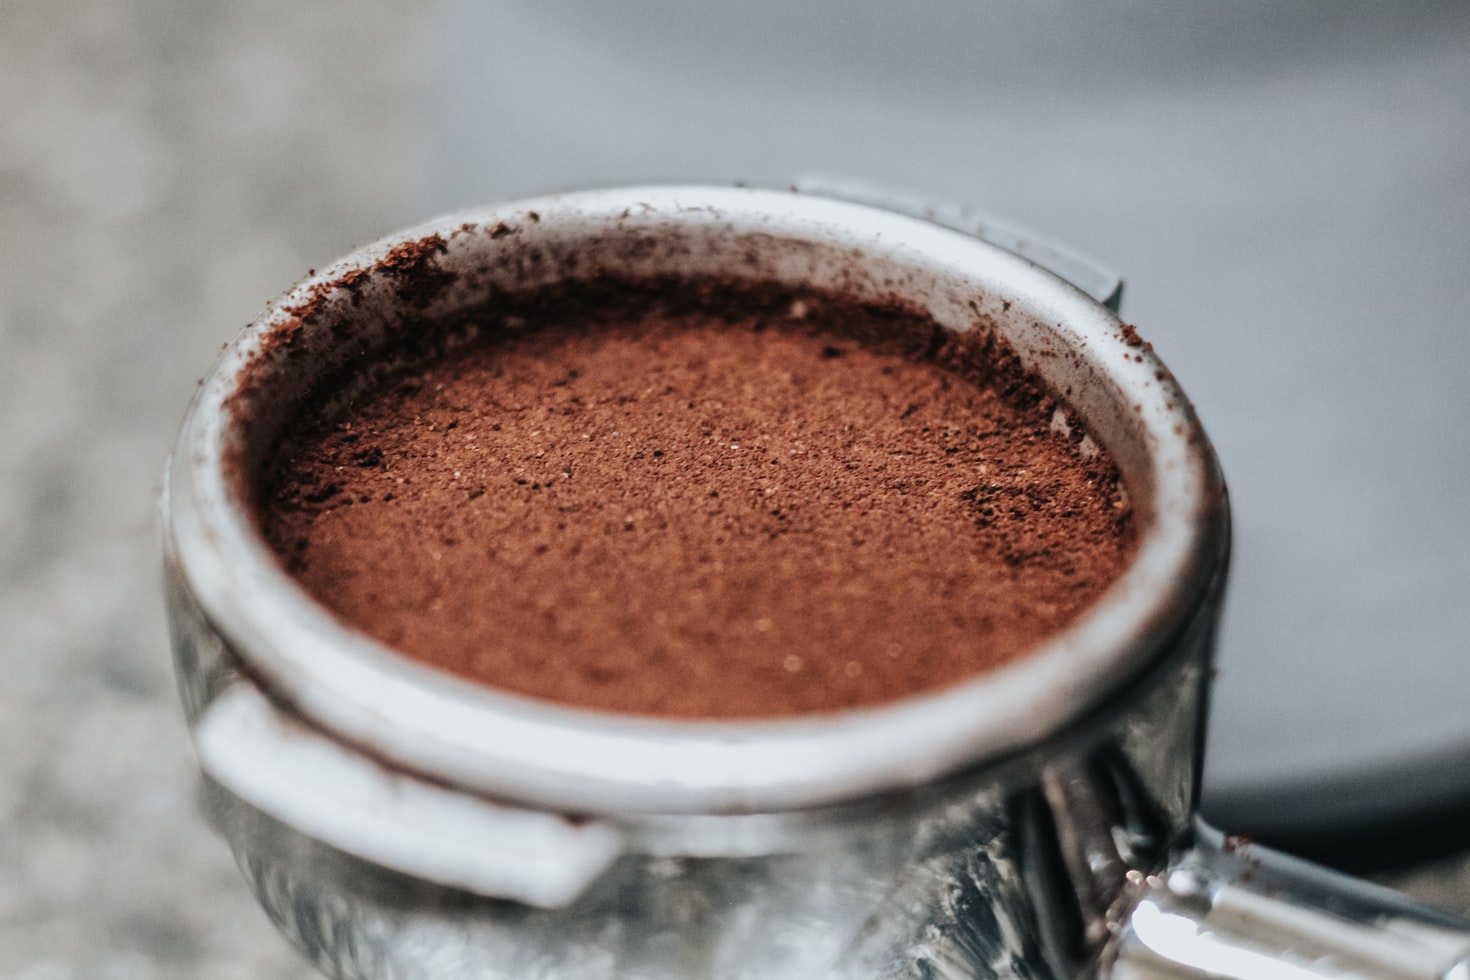 Why Coffee Grind Size Matters